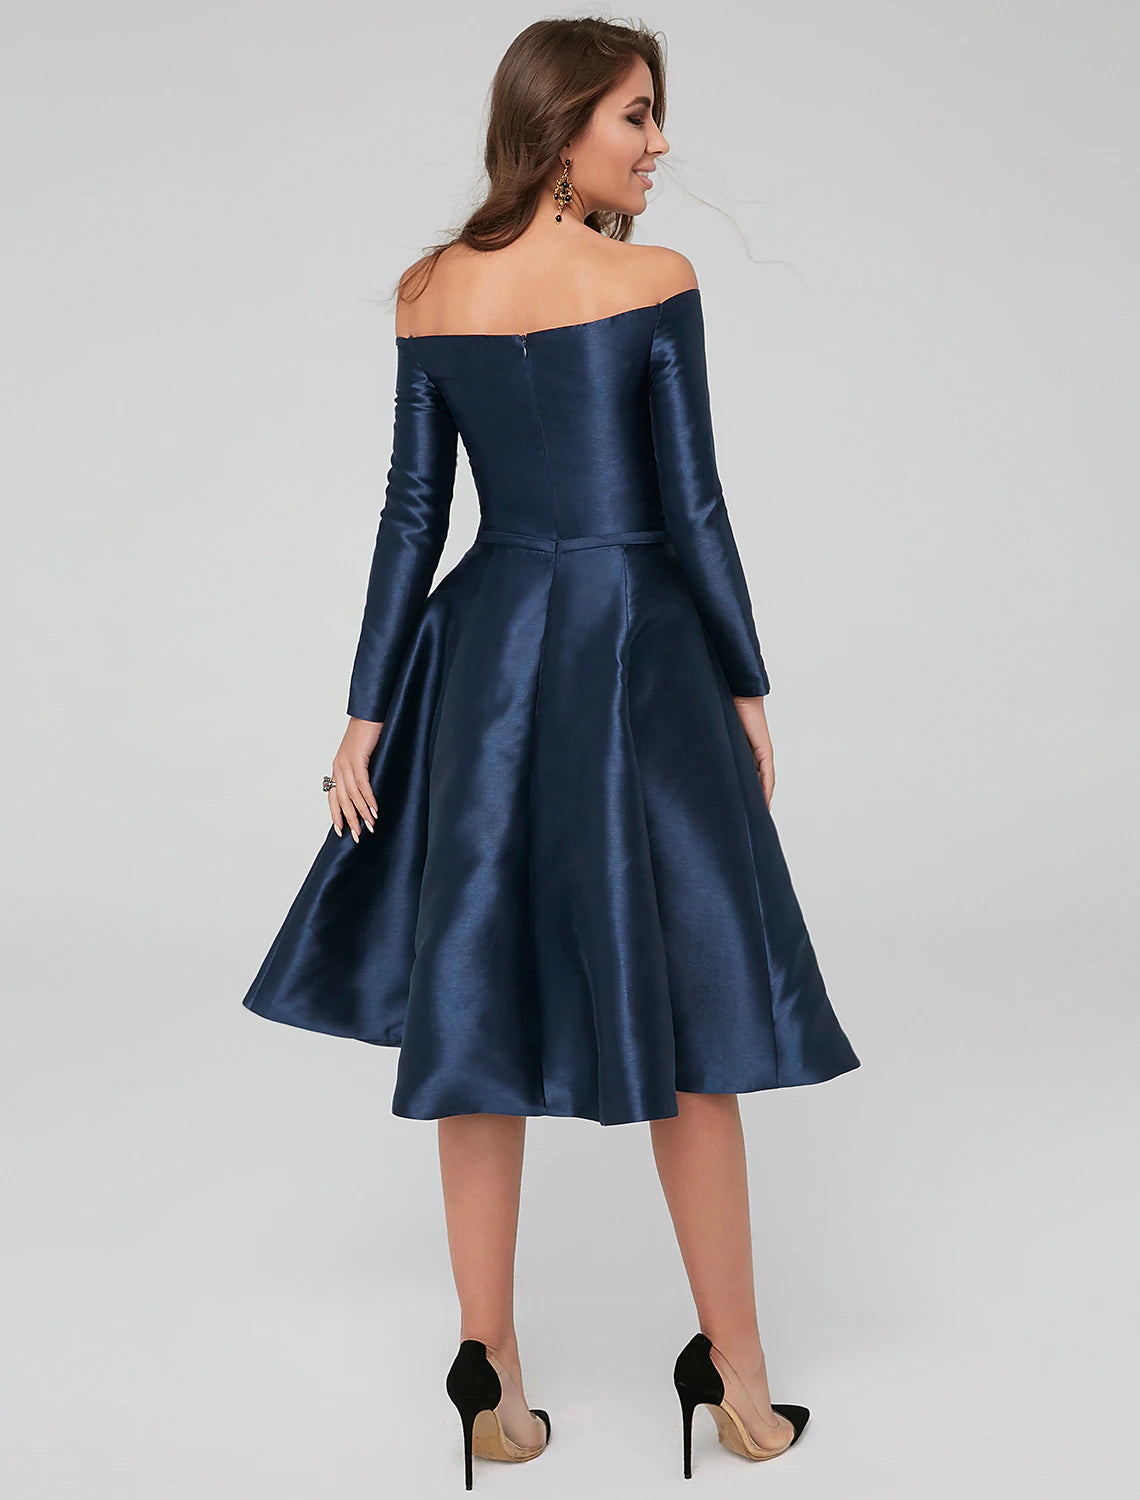 A-Line Special Occasion Dresses Elegant Dress Wedding Guest Cocktail Party Knee Length Long Sleeve Off Shoulder Satin with Pleats